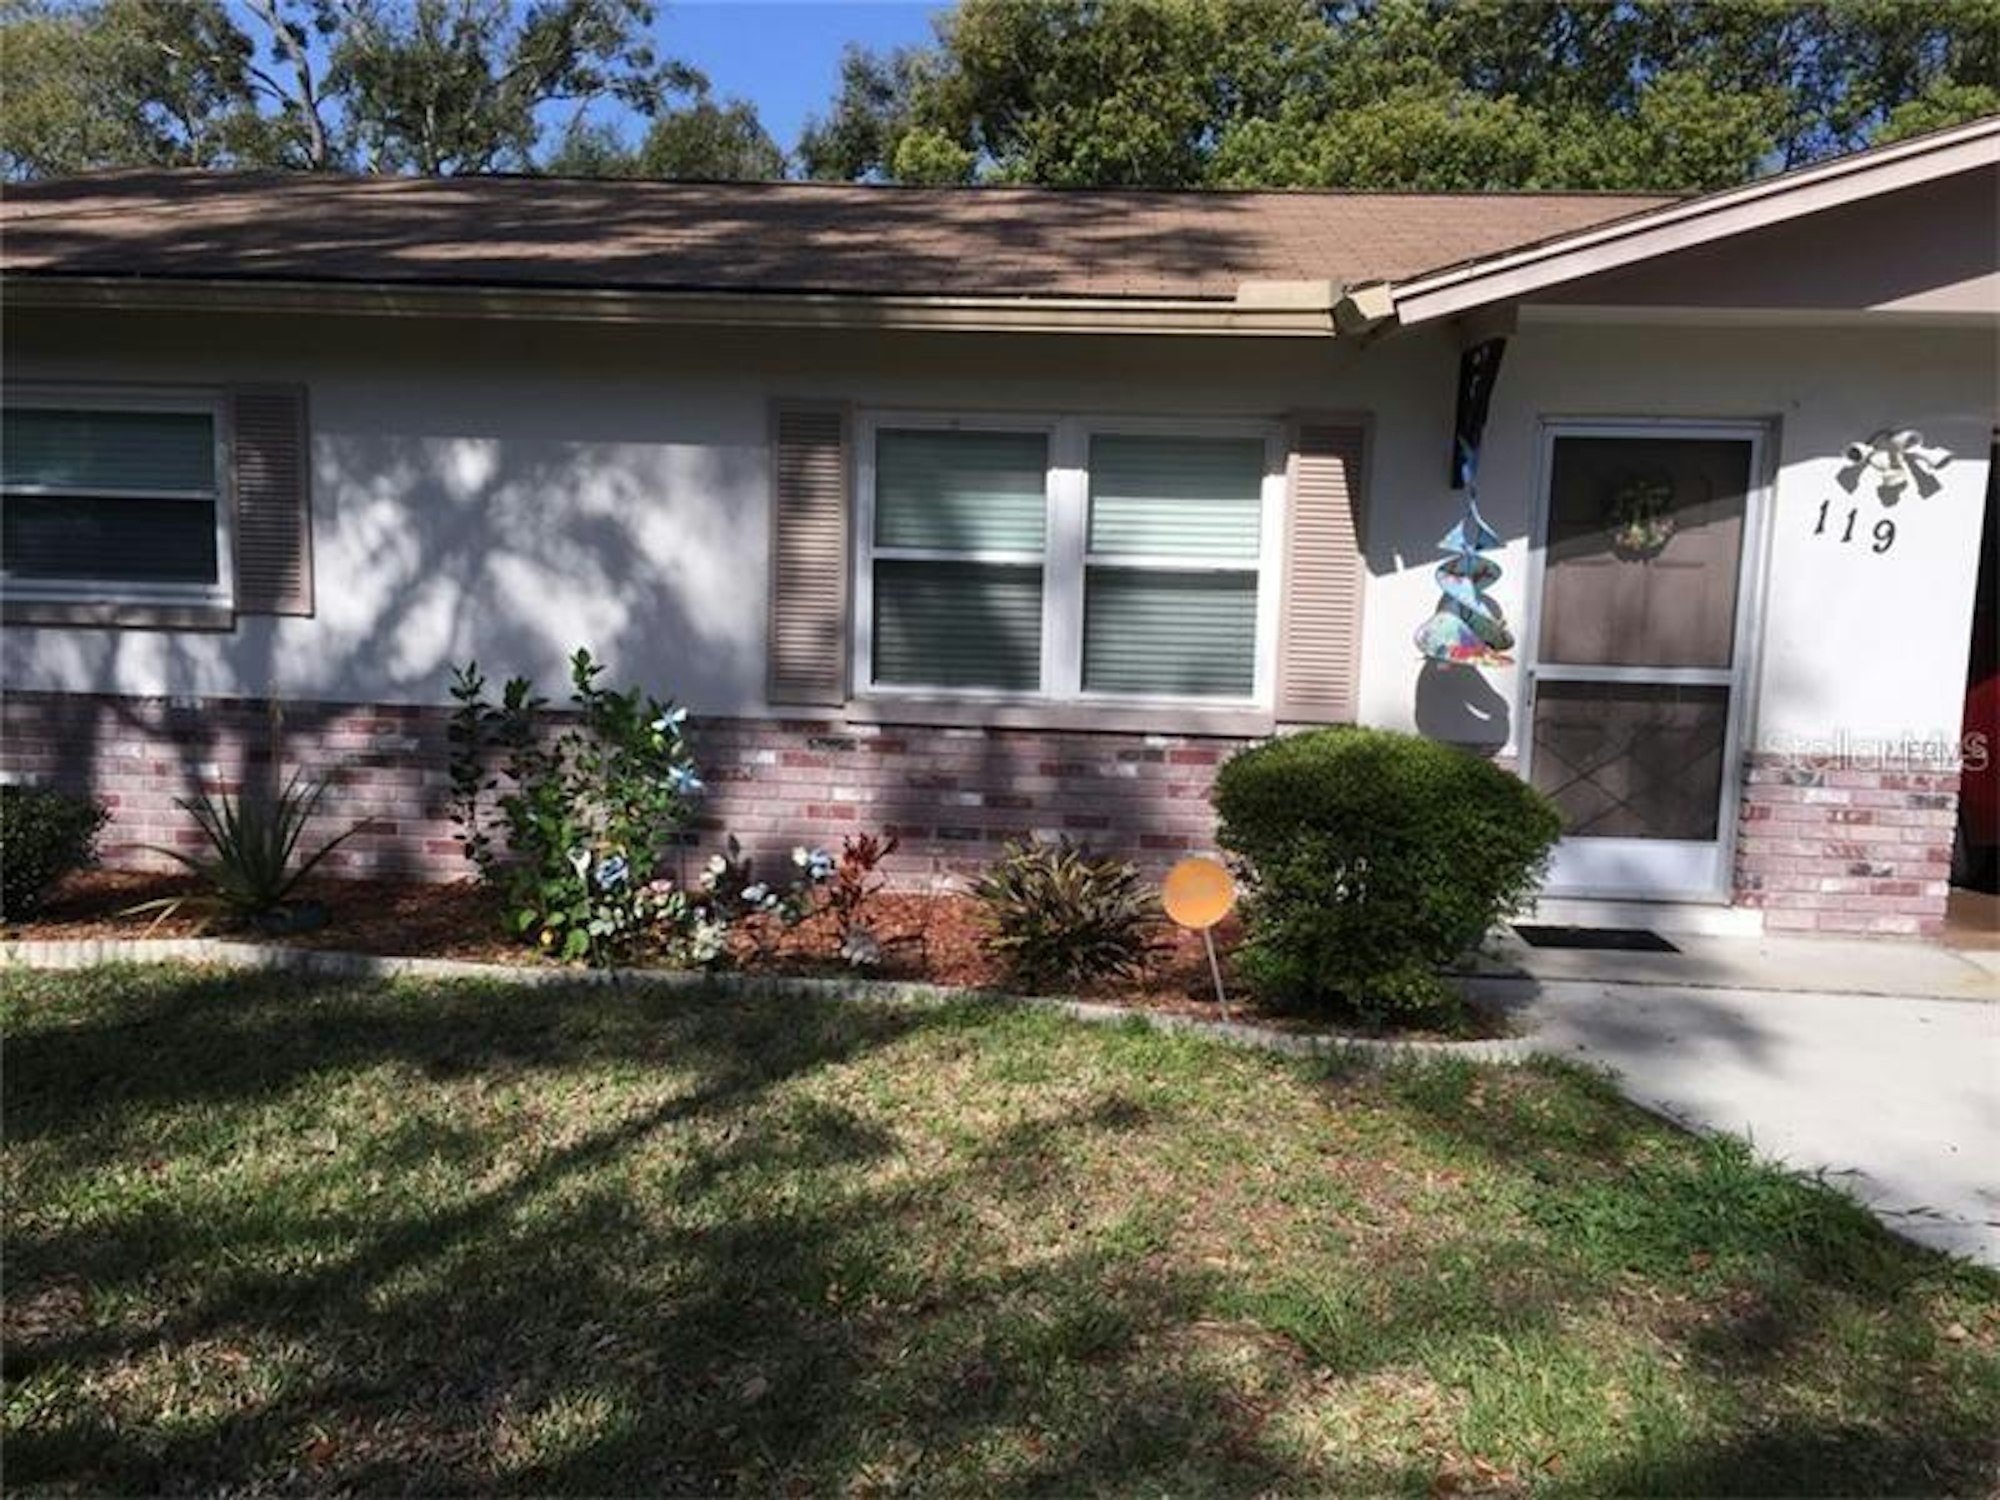 Photo 1 of 3 - 119 Shelby Ave, Spring Hill, FL 34608